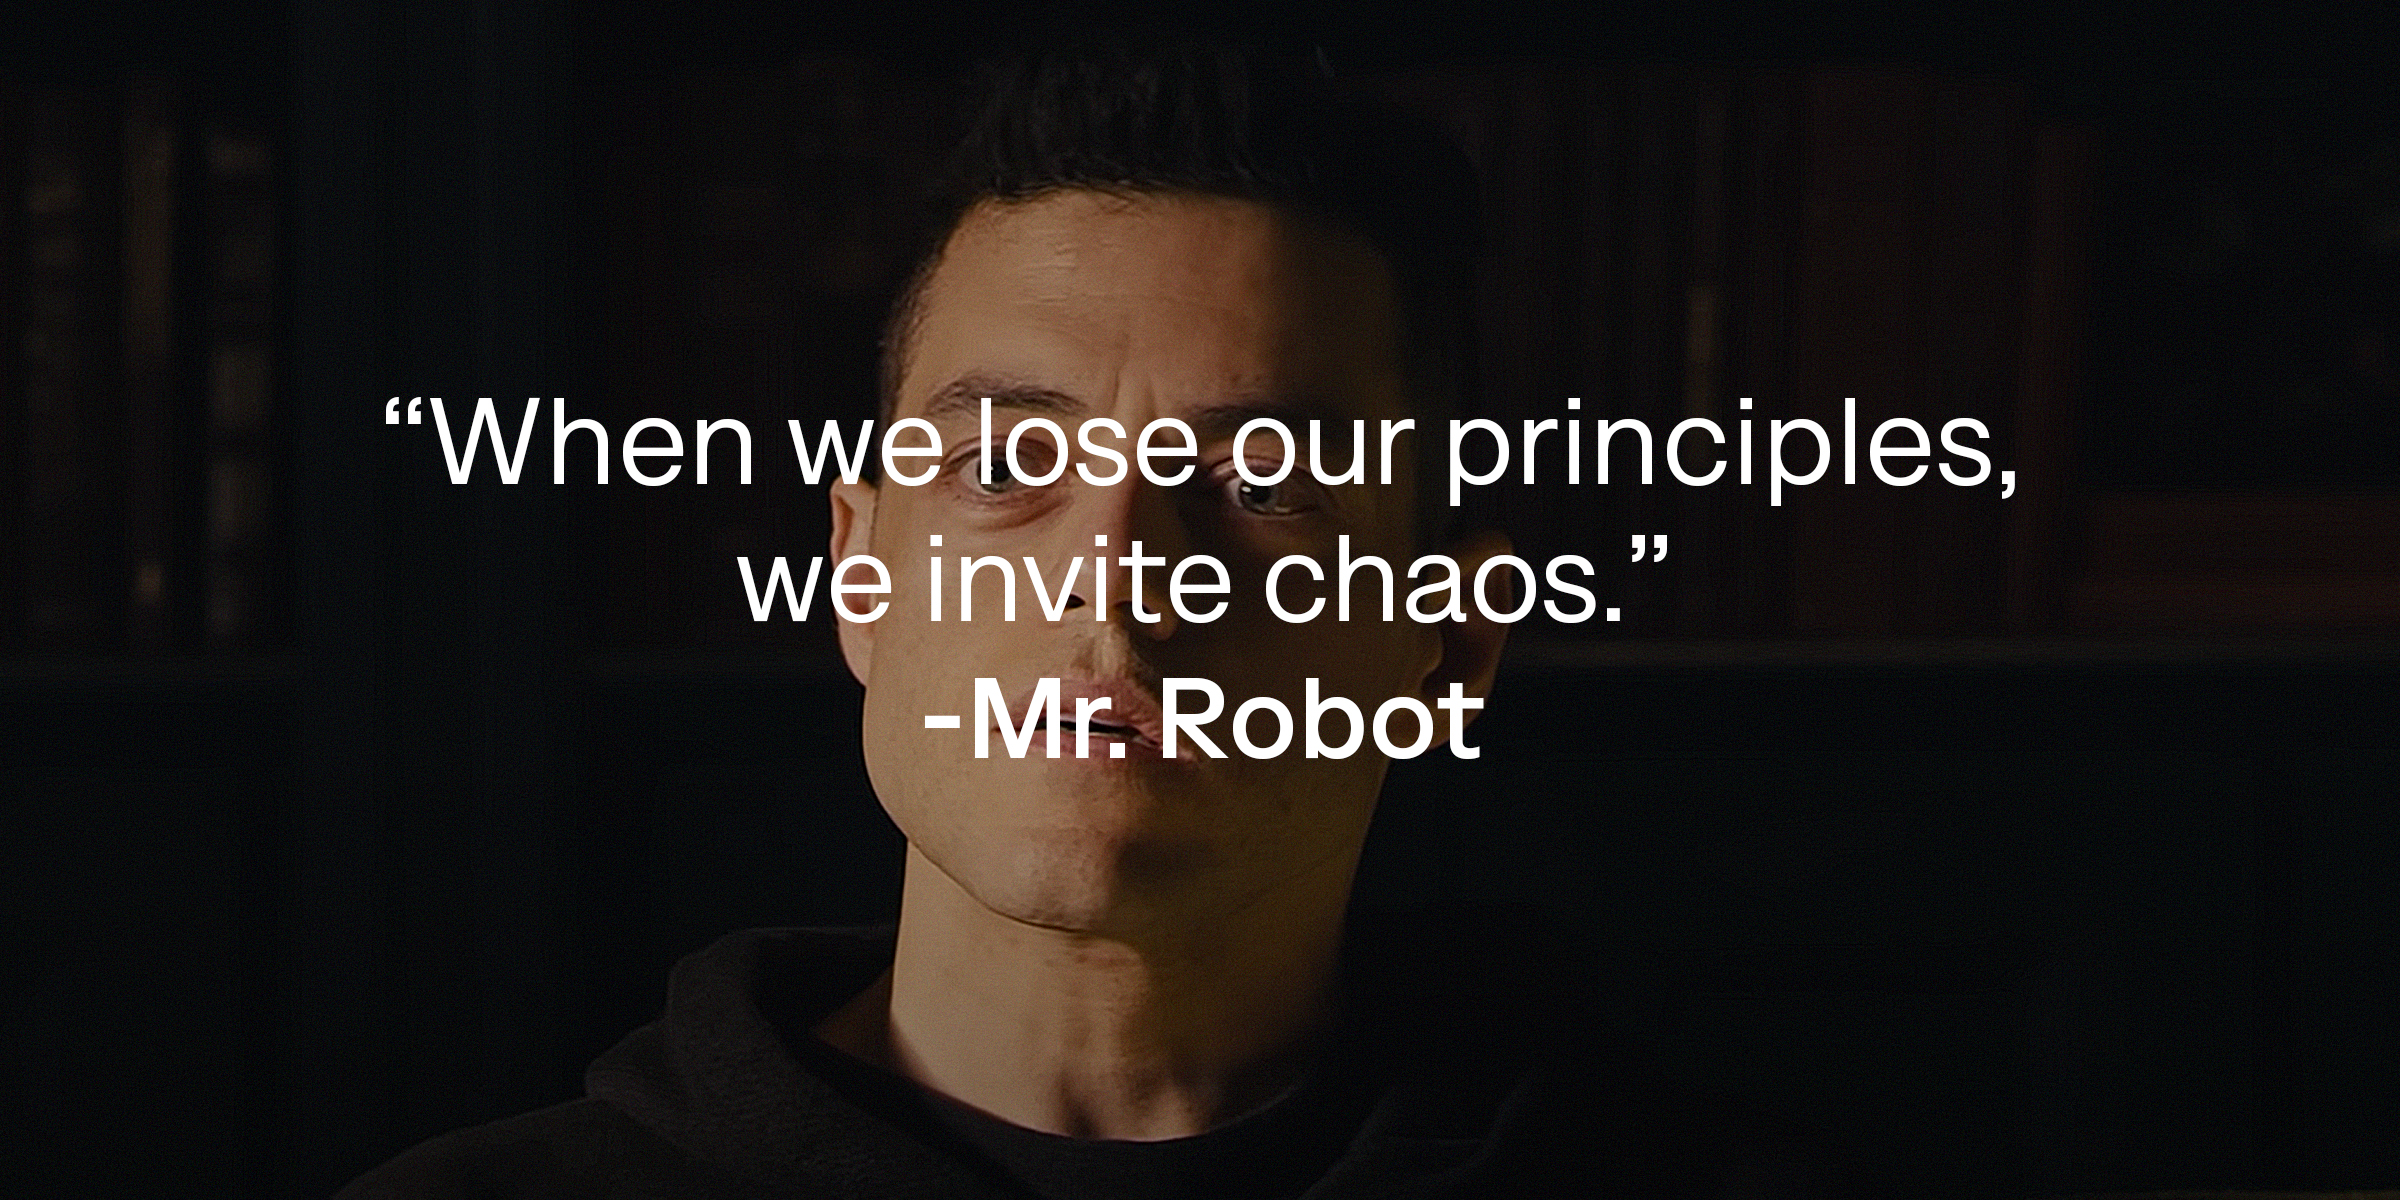 A photo of Mr. Robot with the quote: "When we lose our principles, we invite chaos." | Source: youtube.com/MrRobot